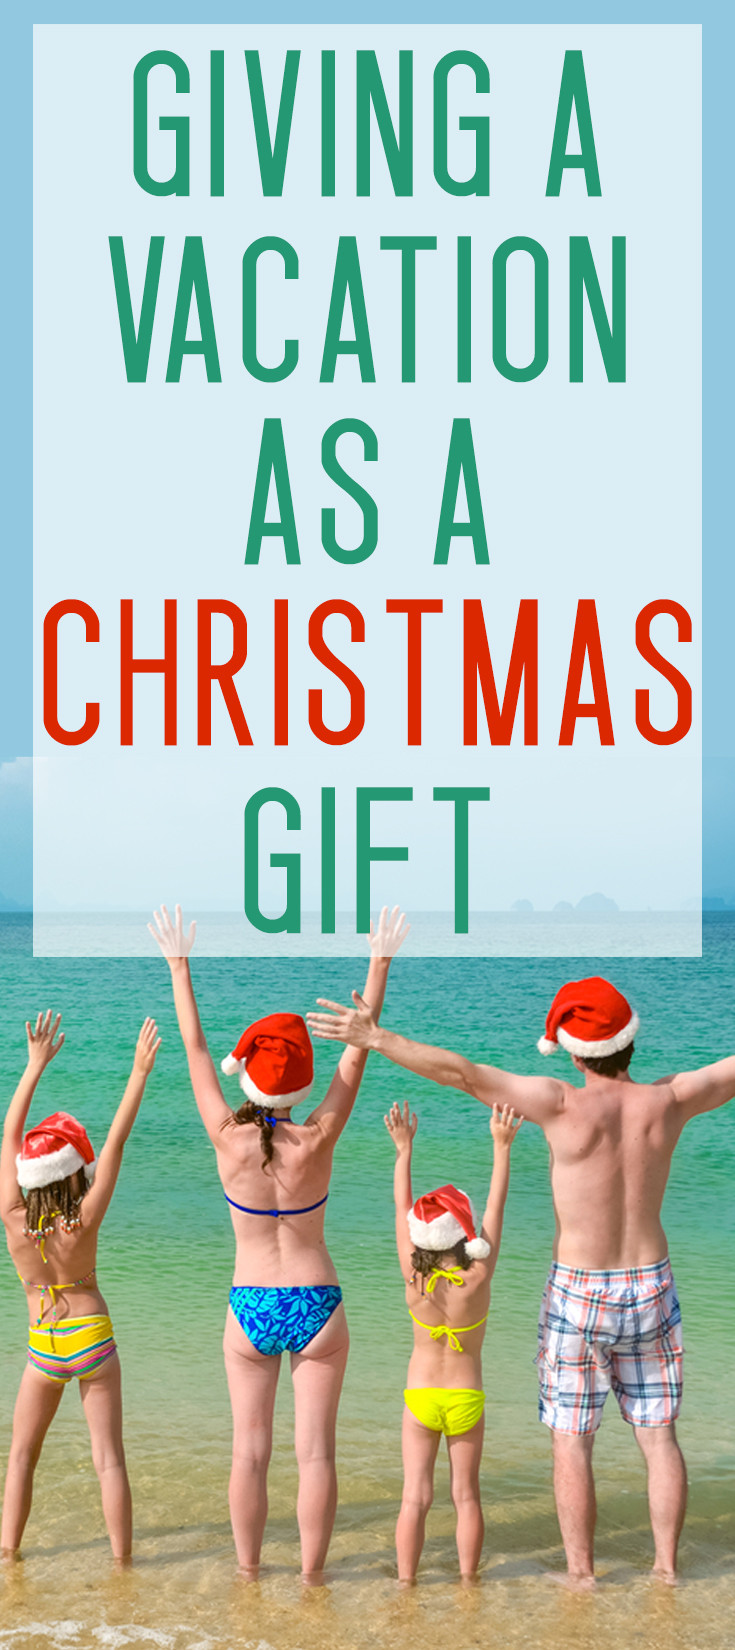 Christmas Vacation Gift Ideas
 Giving a Vacation as a Christmas Gift How & Why Mommy